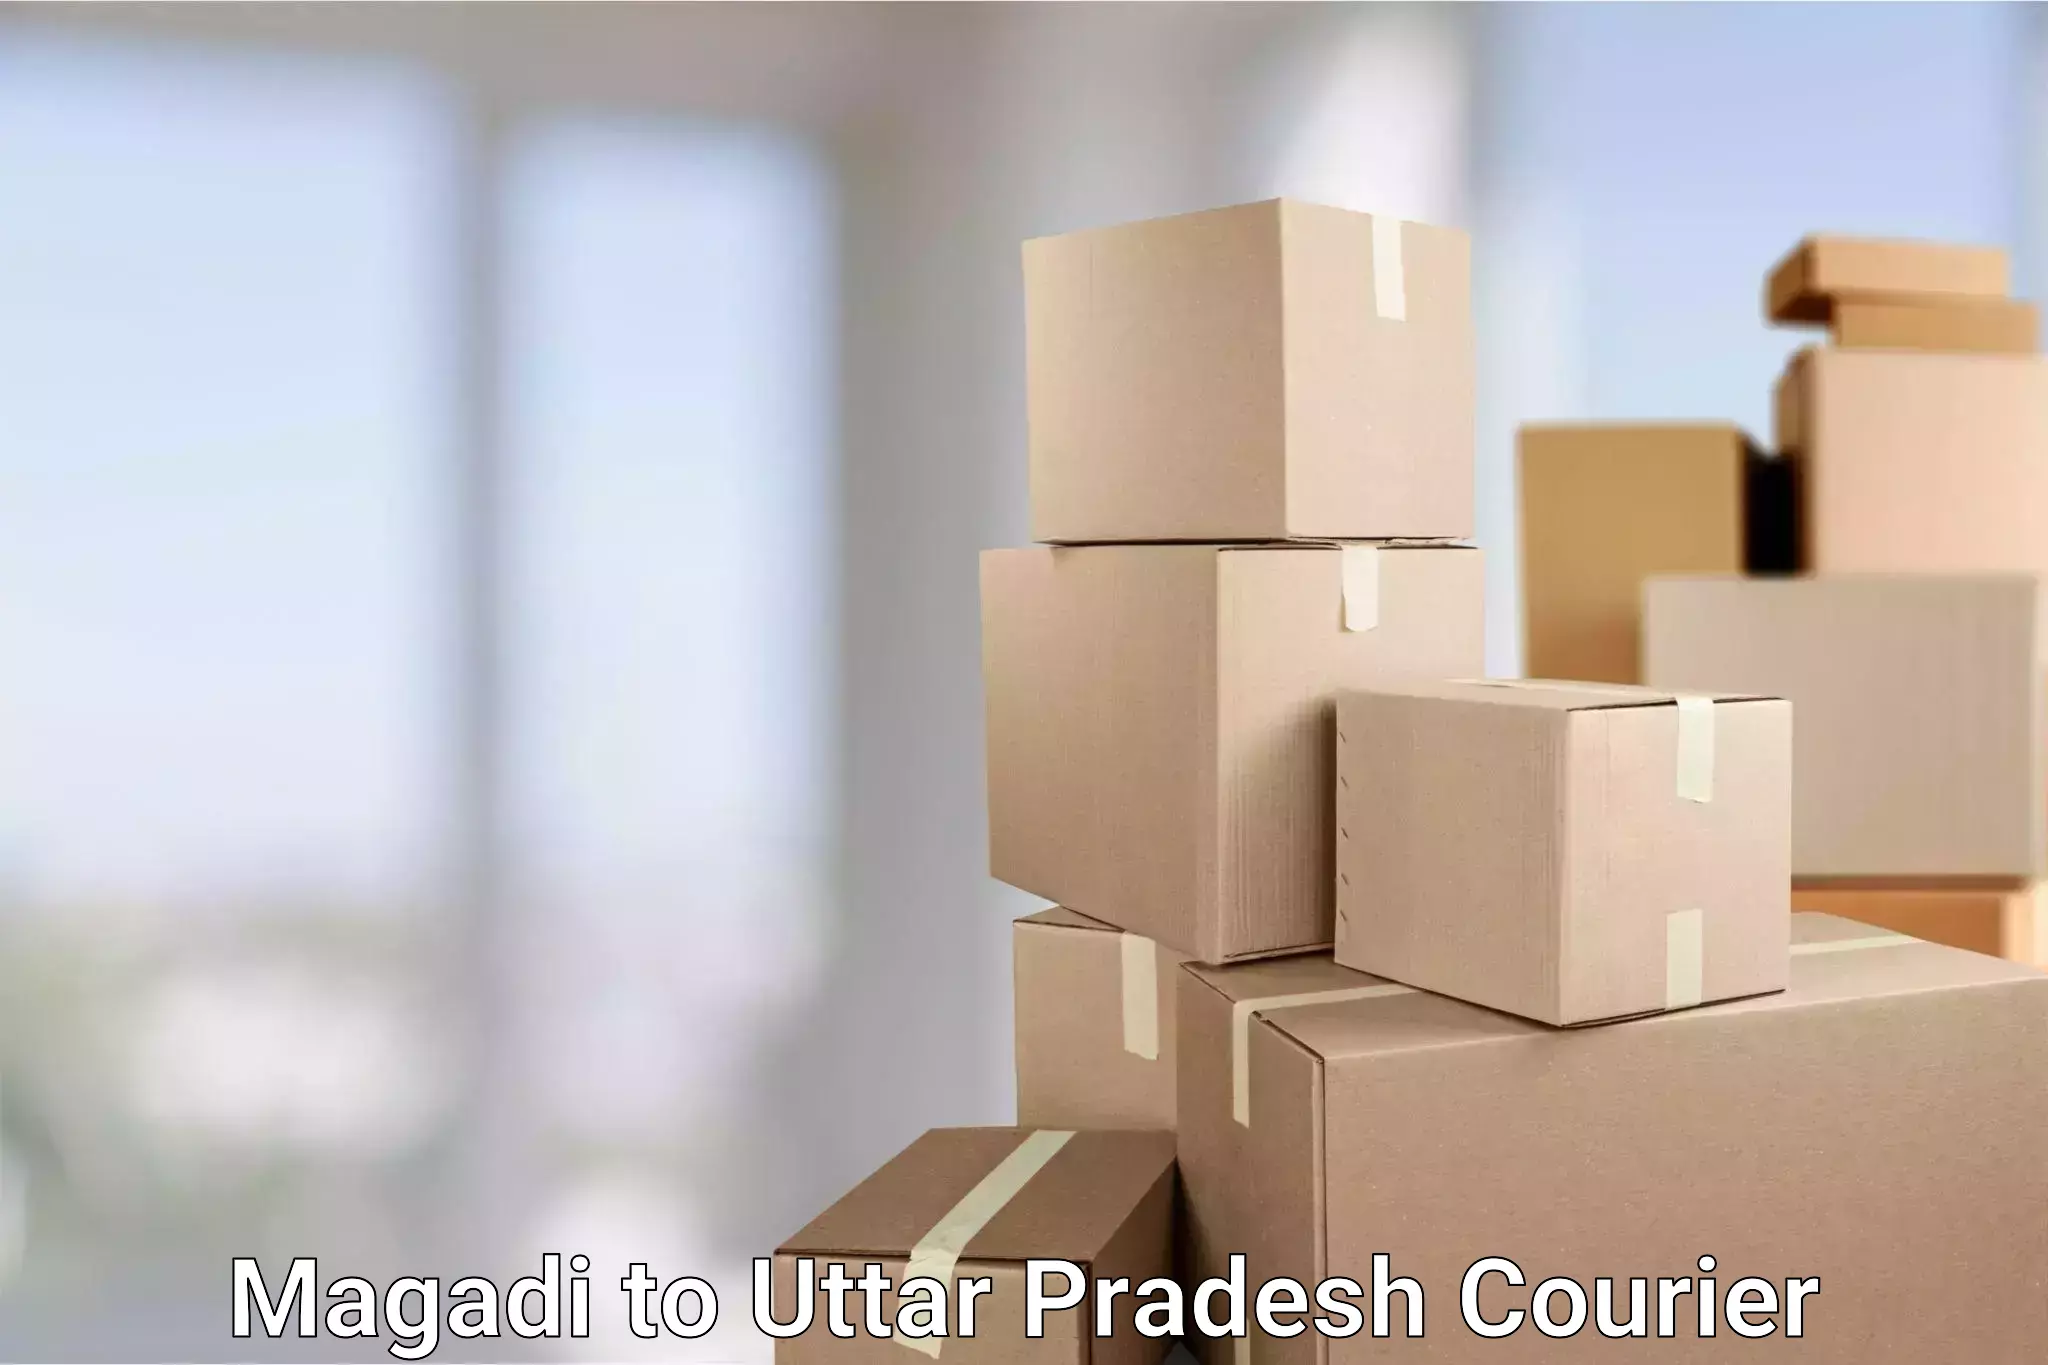 Secure package delivery Magadi to Uttar Pradesh